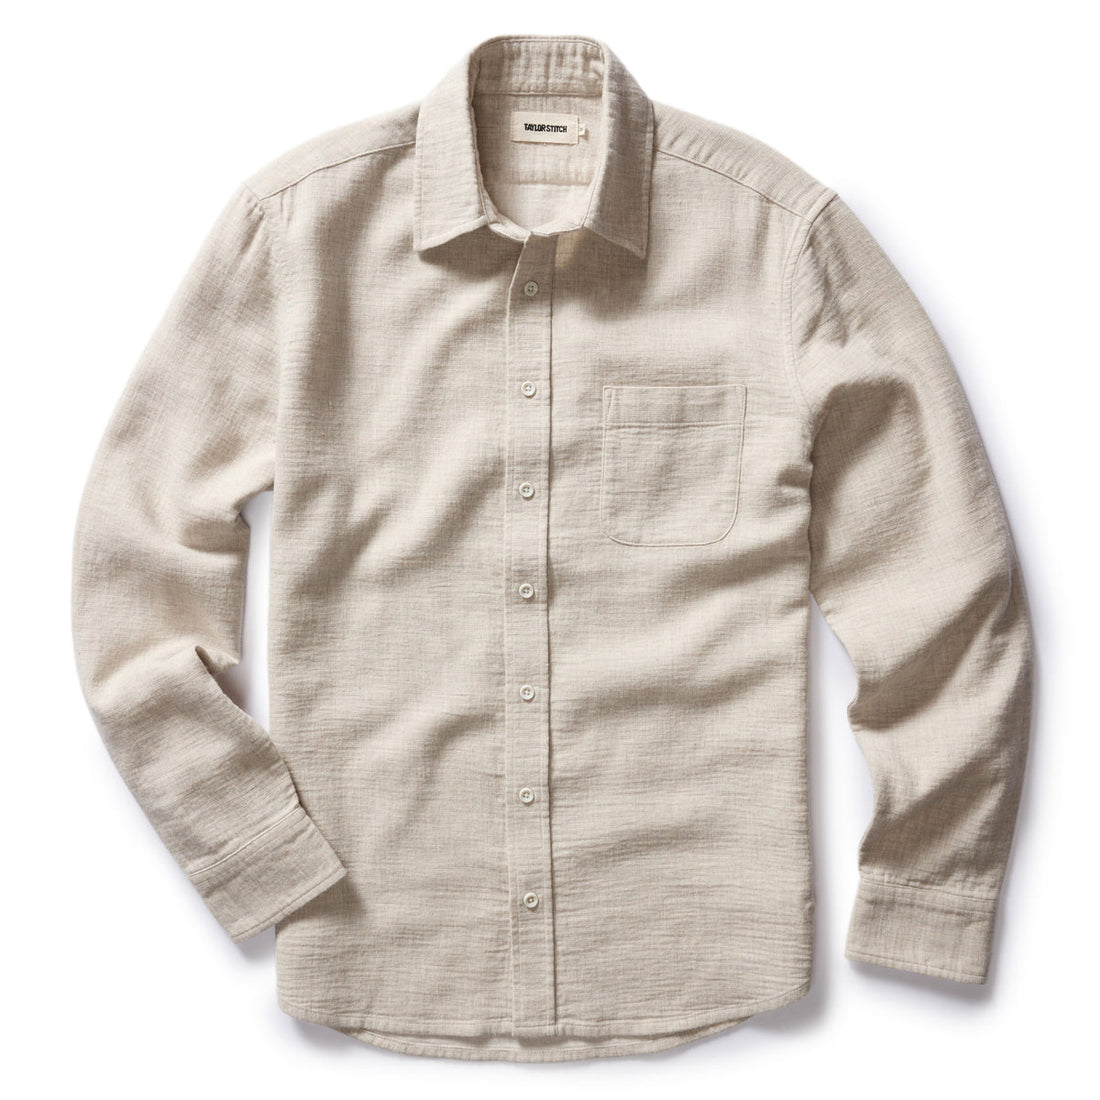 Taylor Stitch - The California in Oat Heather Double Cloth